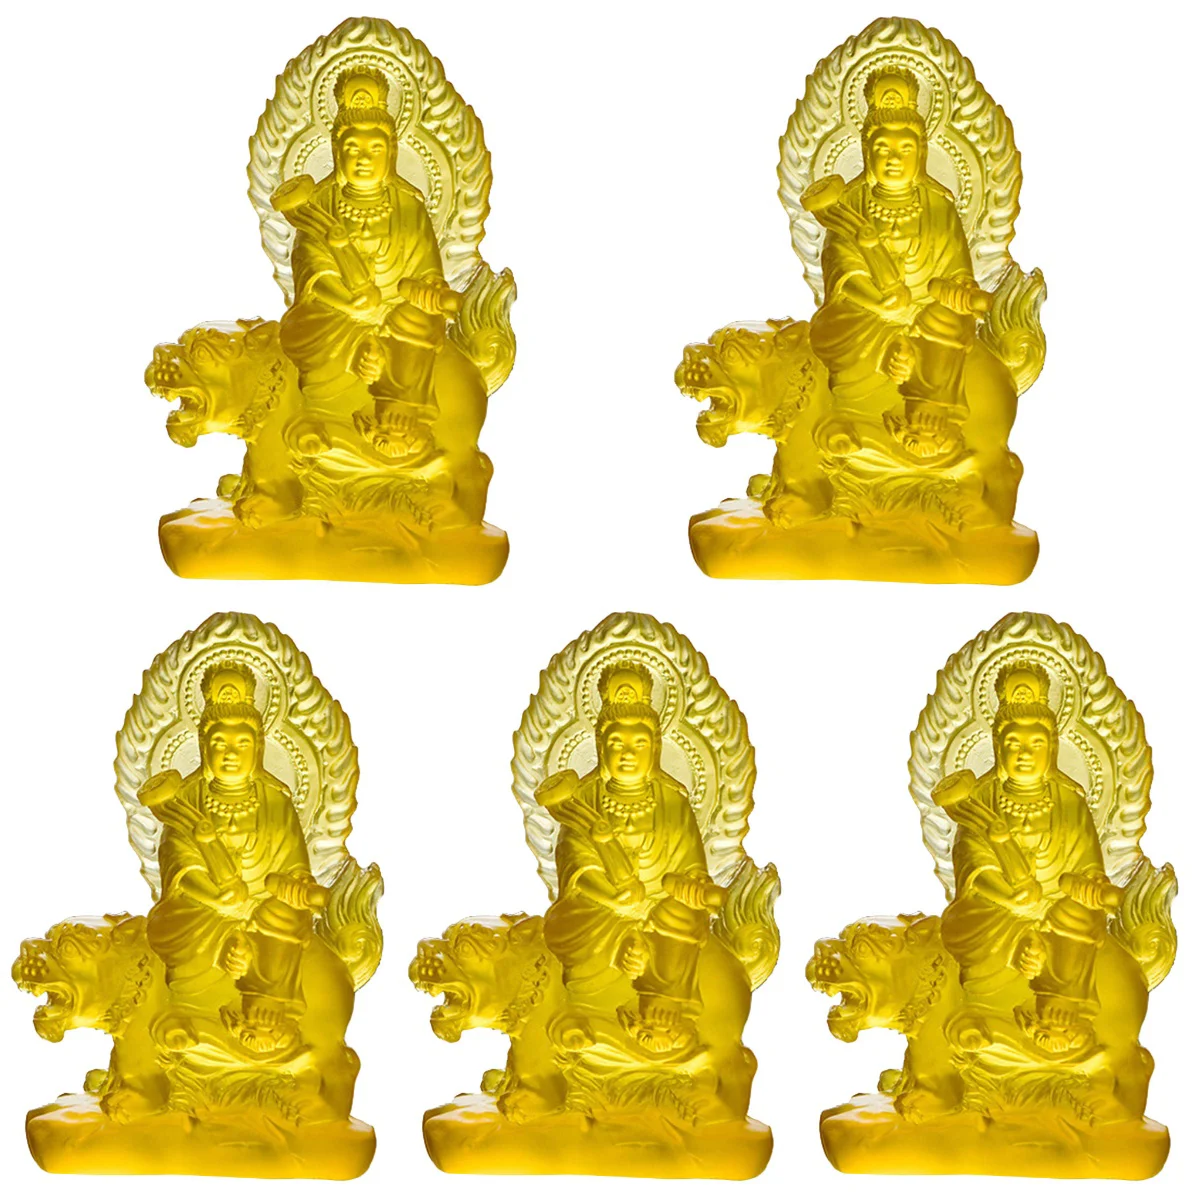 5x Decoration Home Office Temple Figurine For Home Figurine Decor Figurine for Desk Home Office